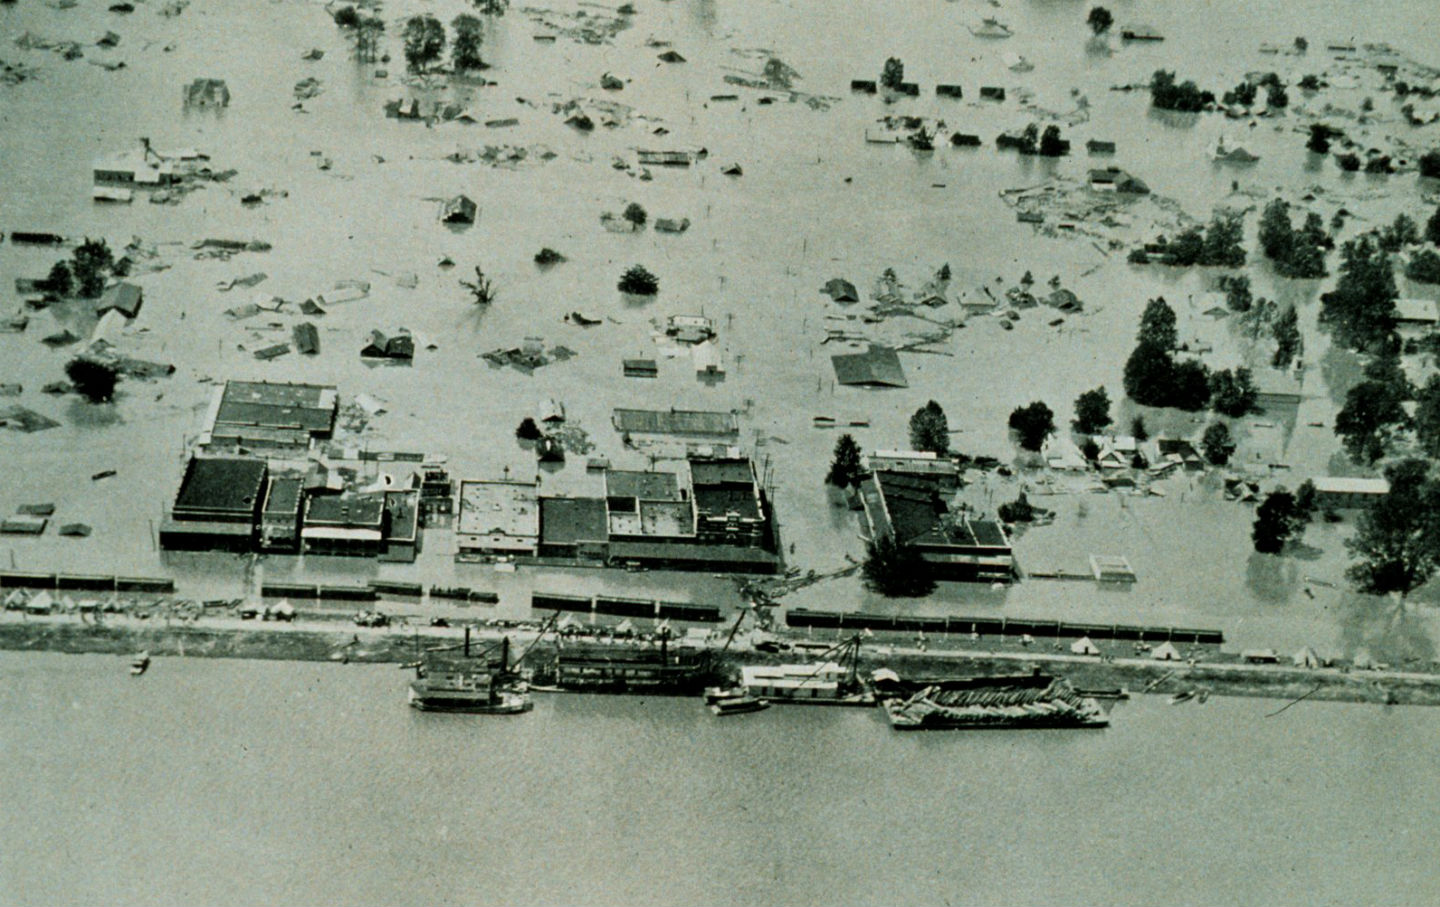 April 15, 1927: The Great Mississippi River Flood Inundates New Orleans and the Delta